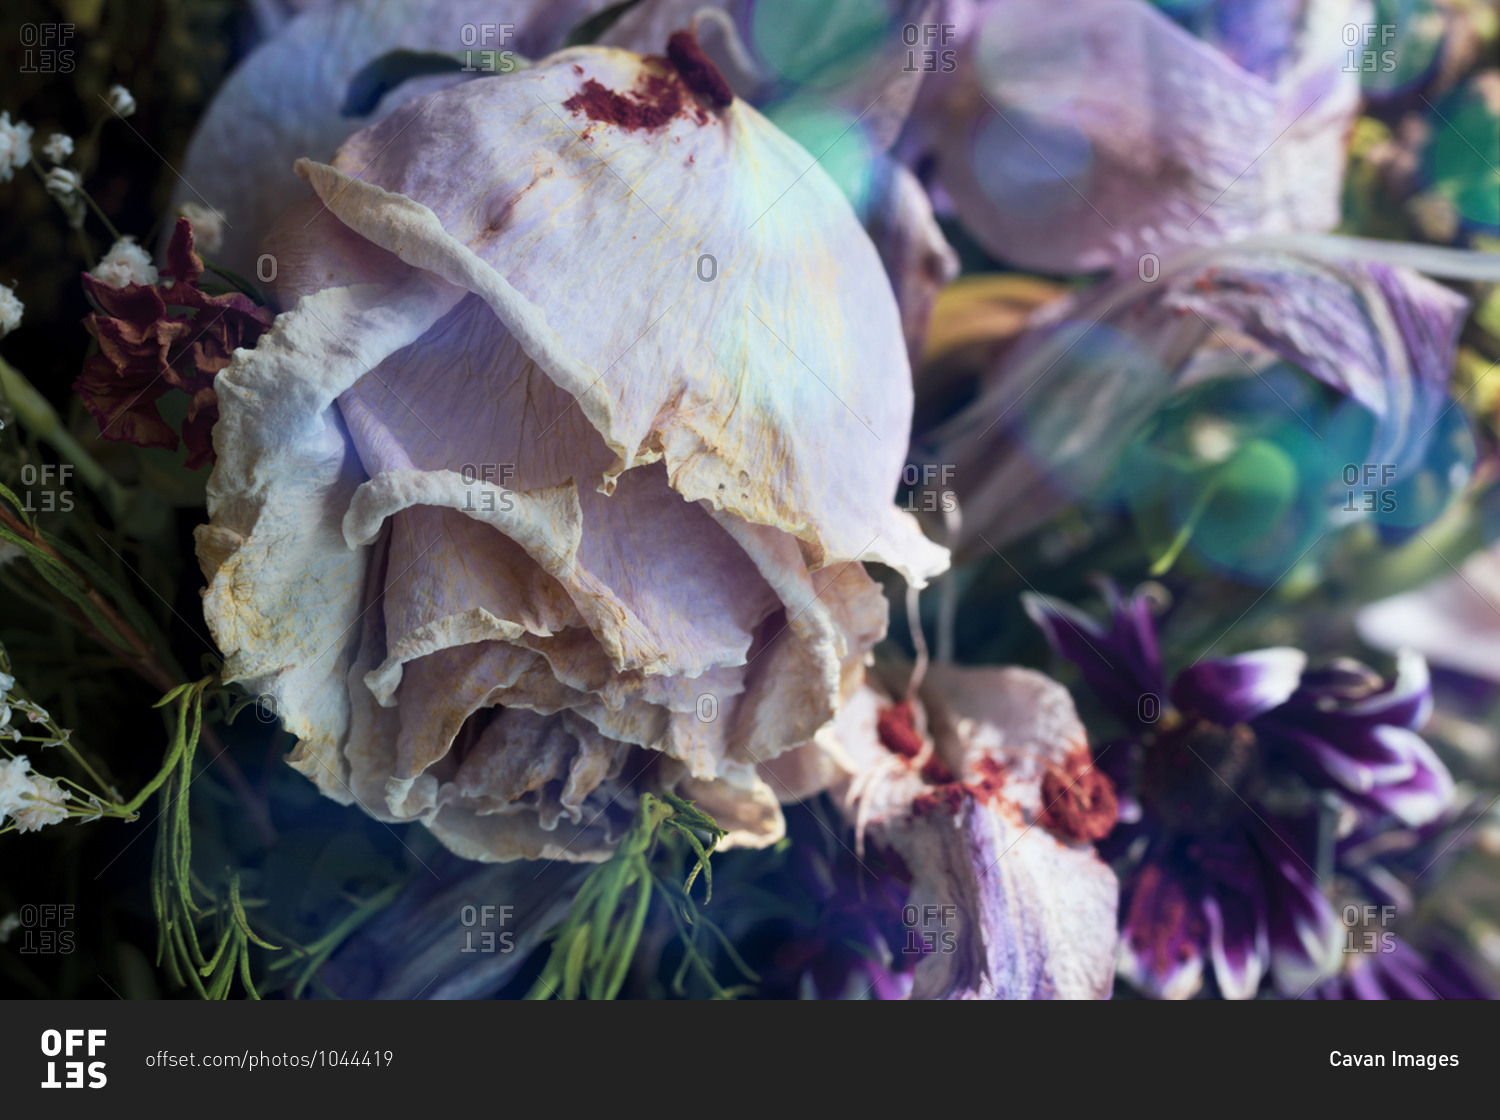 Bouquet of dead flowers with a withered rose in the foreground